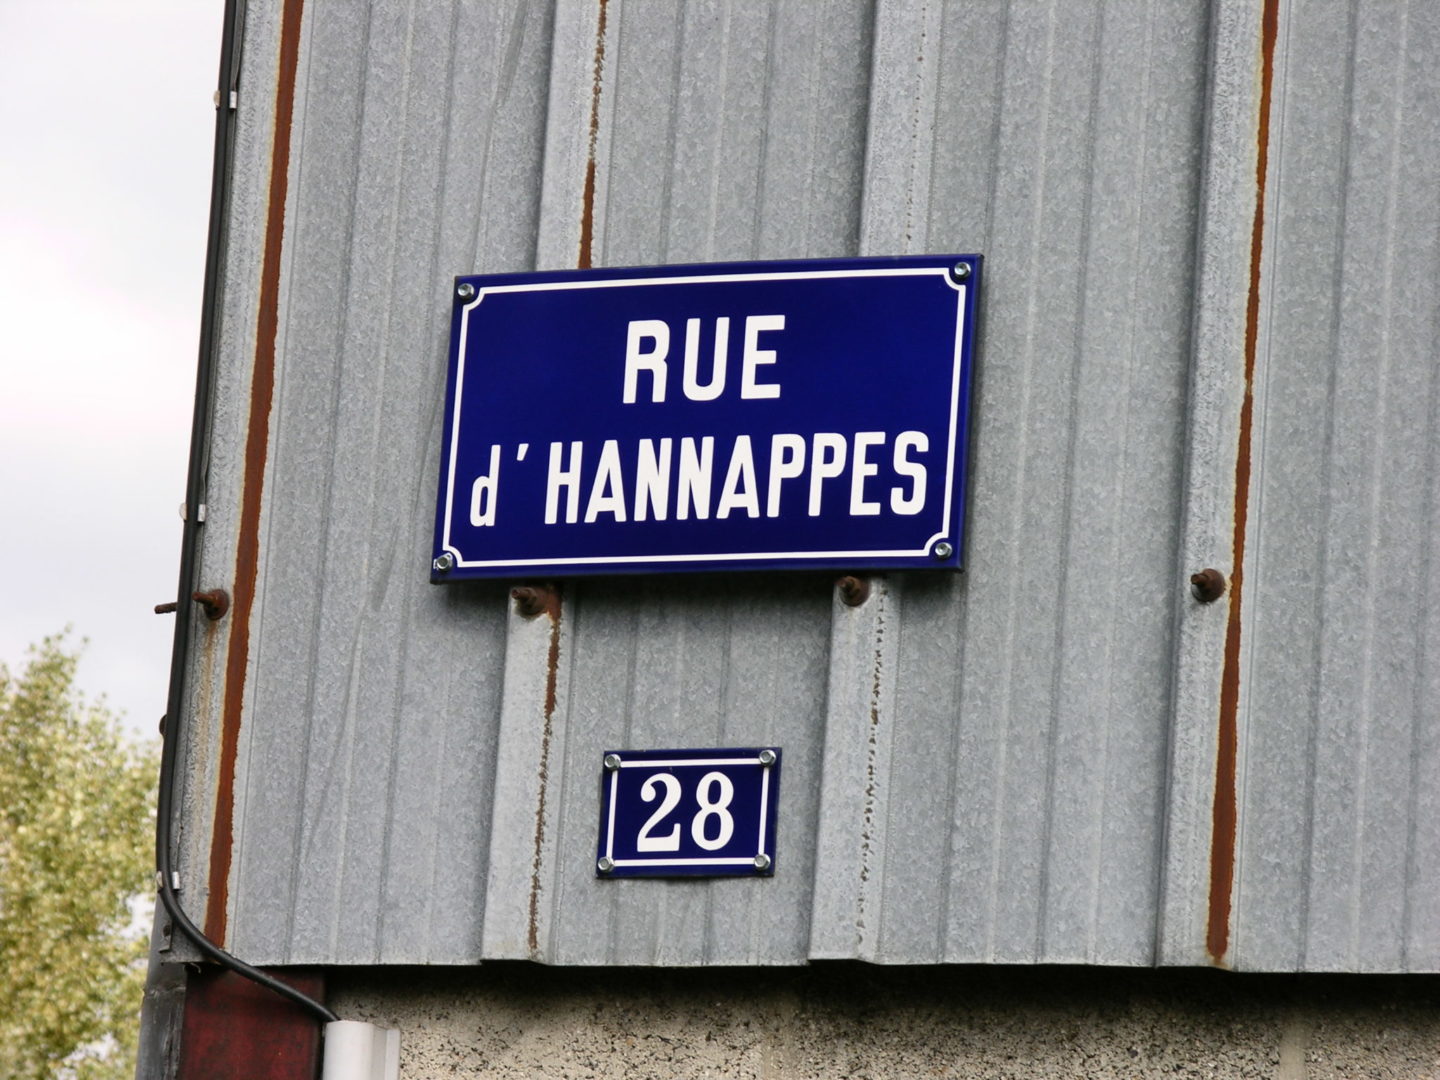 Rue d'Hannappes